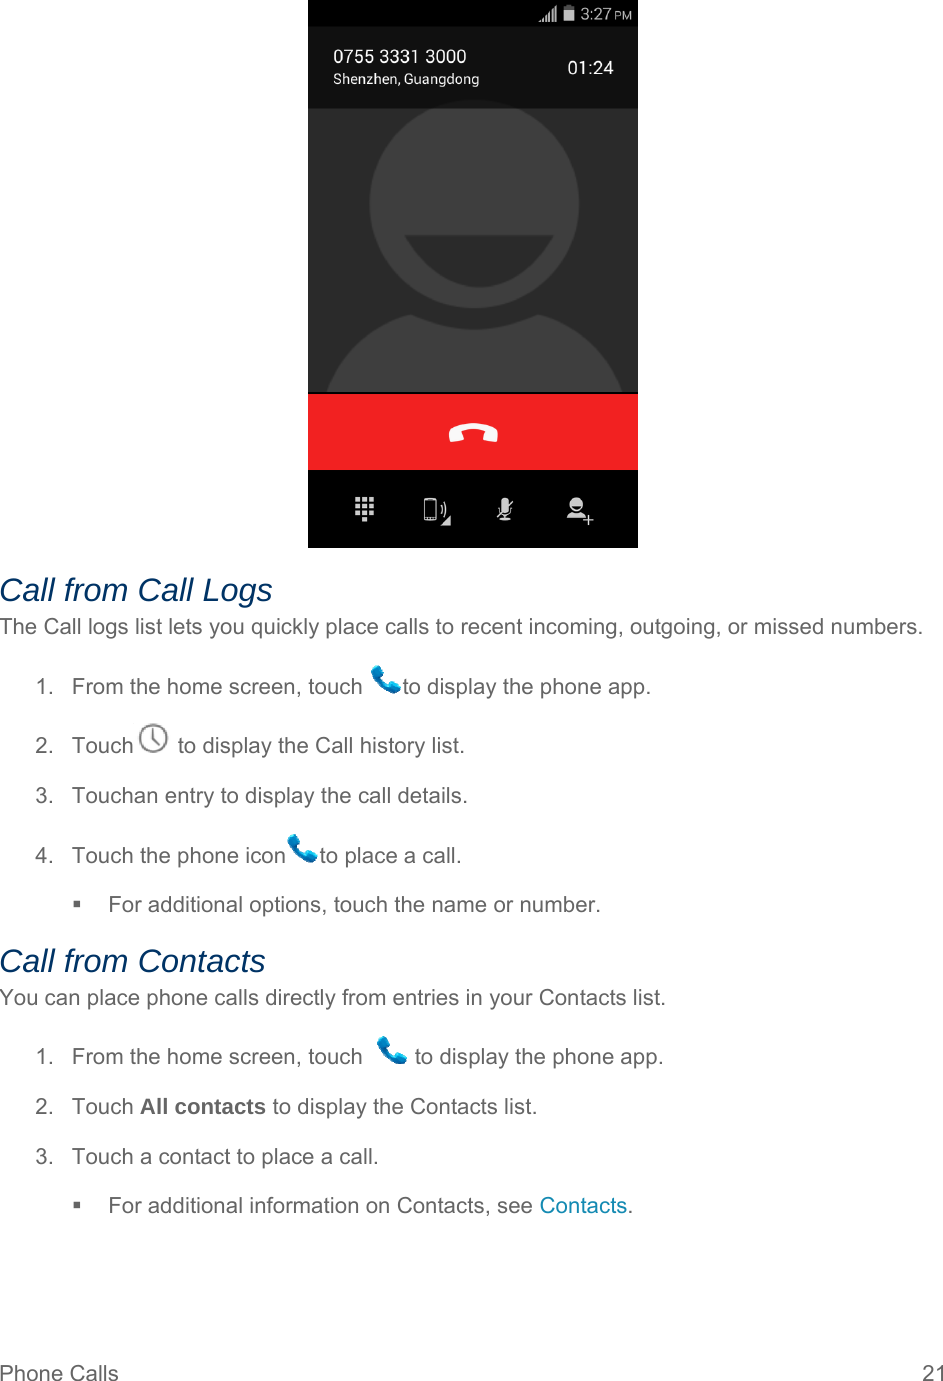 Phone Calls  21  Call from Call Logs The Call logs list lets you quickly place calls to recent incoming, outgoing, or missed numbers. 1.  From the home screen, touch  to display the phone app. 2.  Touch  to display the Call history list. 3.  Touchan entry to display the call details. 4.  Touch the phone icon to place a call.   For additional options, touch the name or number. Call from Contacts You can place phone calls directly from entries in your Contacts list. 1.  From the home screen, touch    to display the phone app. 2. Touch All contacts to display the Contacts list. 3.  Touch a contact to place a call.   For additional information on Contacts, see Contacts.   